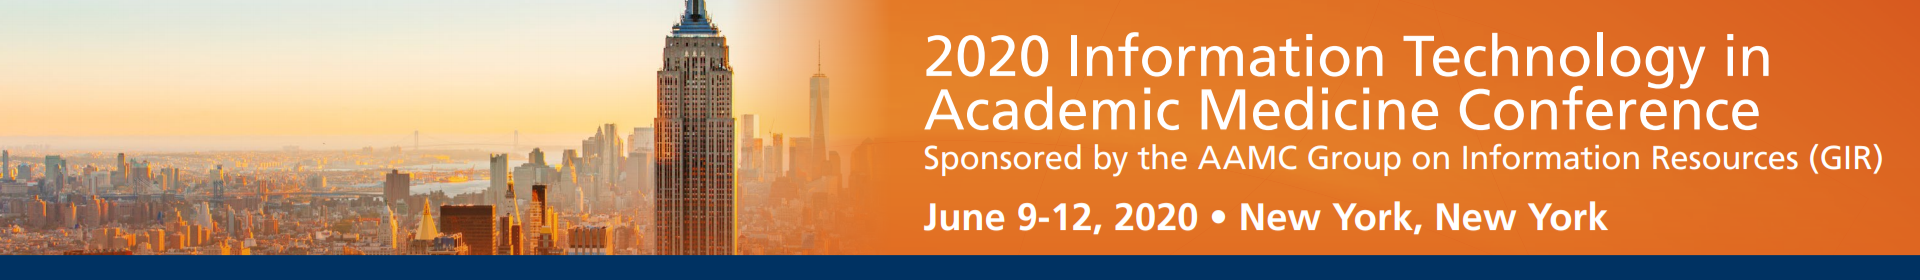 2020 Information Technology in Academic Medicine Conference Sponsored by the GIR Event Banner